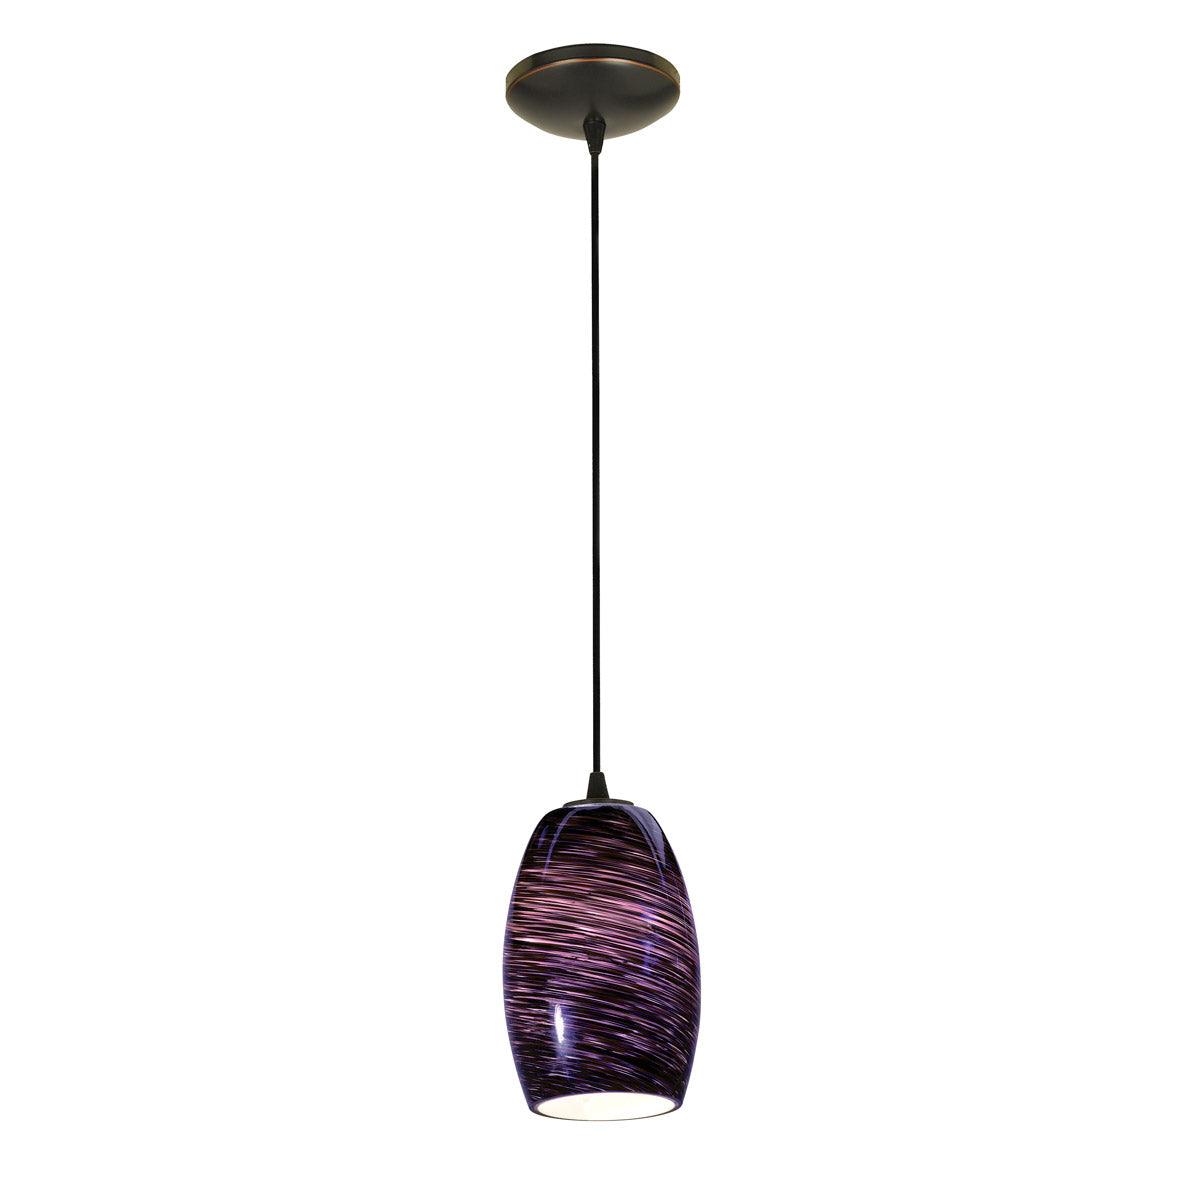 Chianti 5 in. Bell Replaceable LED Pendant Light